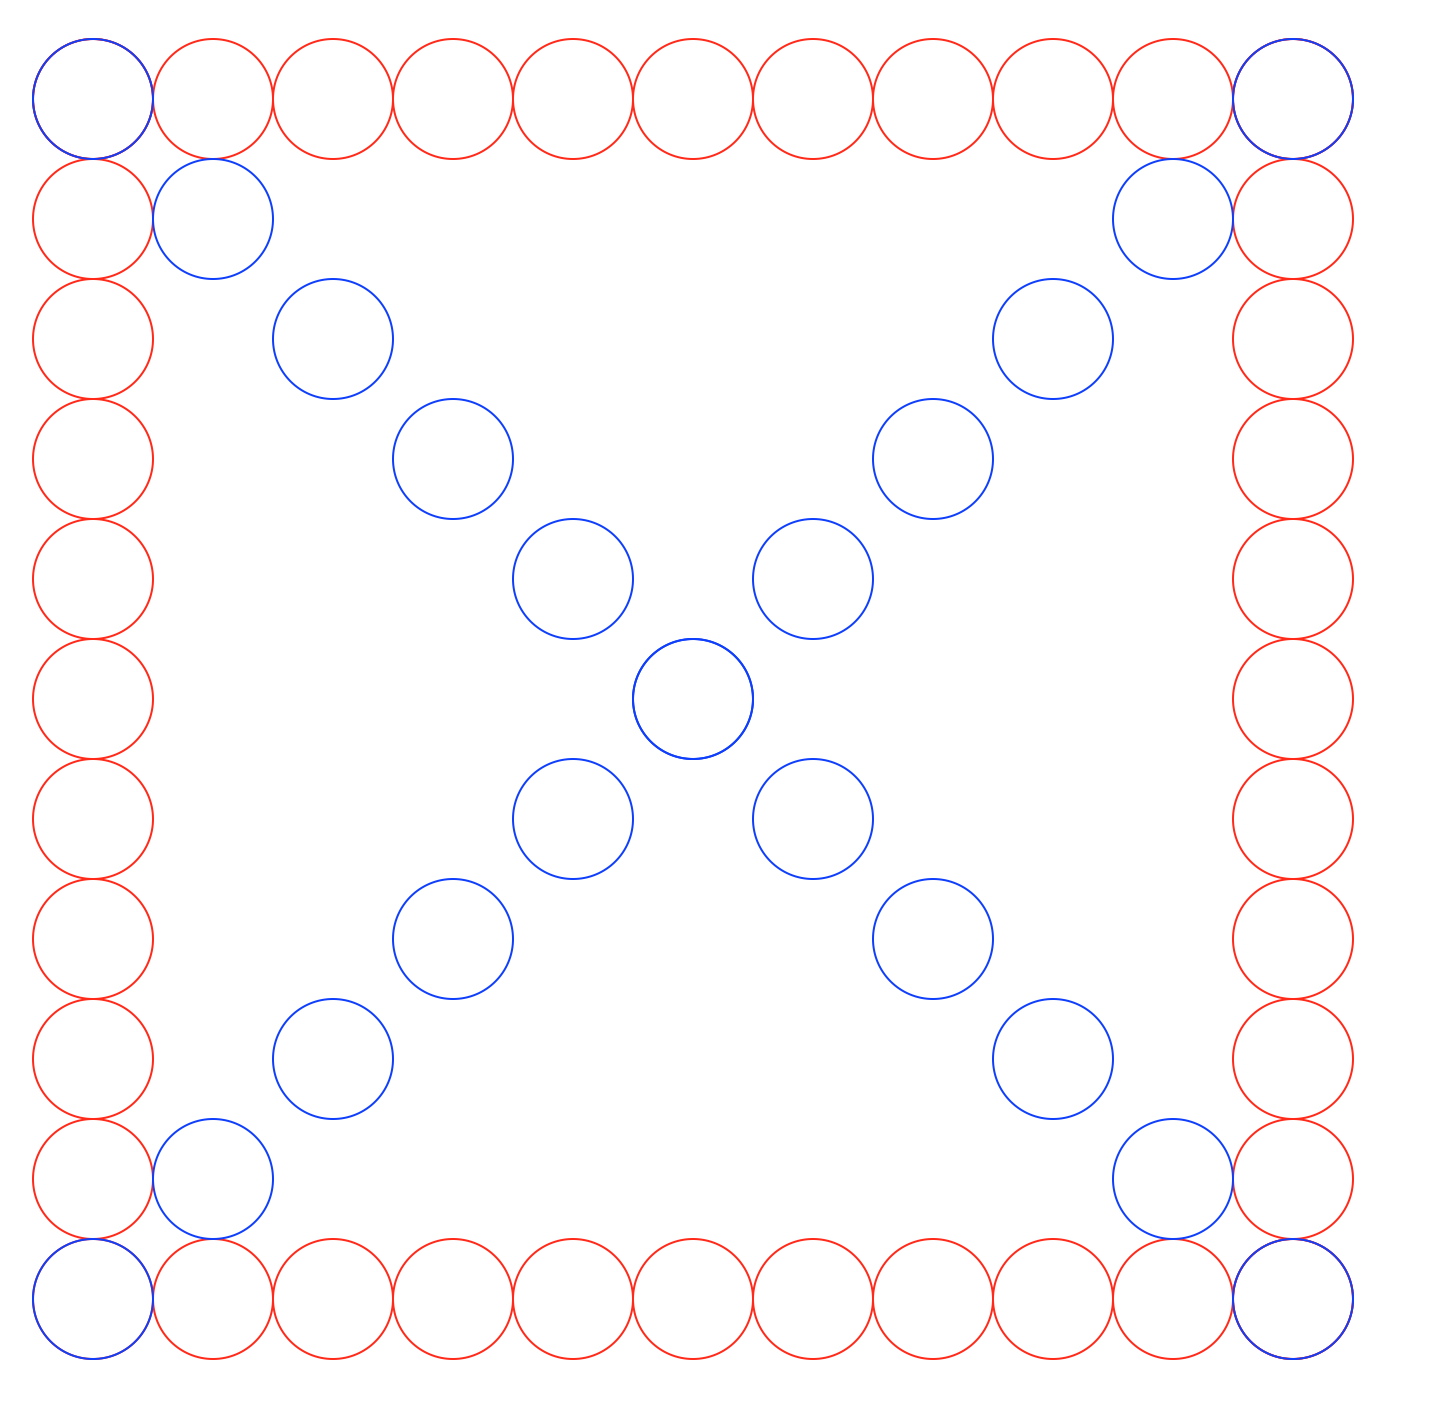 Square of 11 circles by 11 circles, with the diagonal filled in